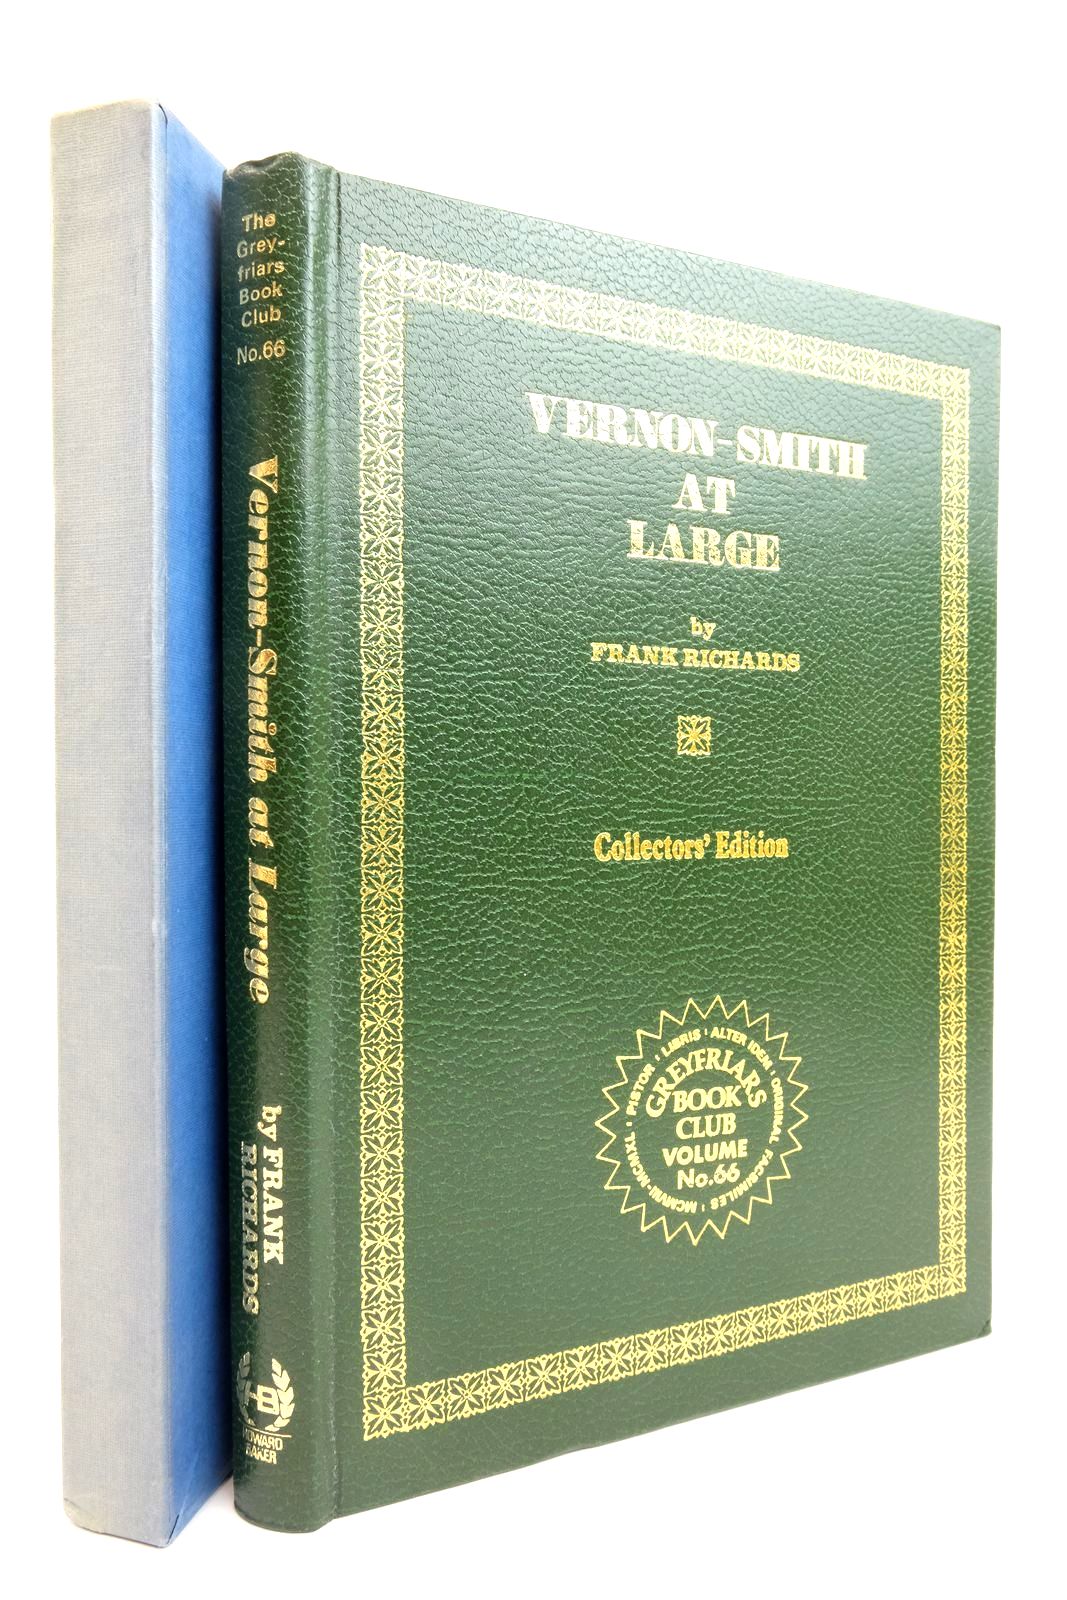 Photo of VERNON-SMITH AT LARGE written by Richards, Frank published by Howard Baker (STOCK CODE: 2136635)  for sale by Stella & Rose's Books